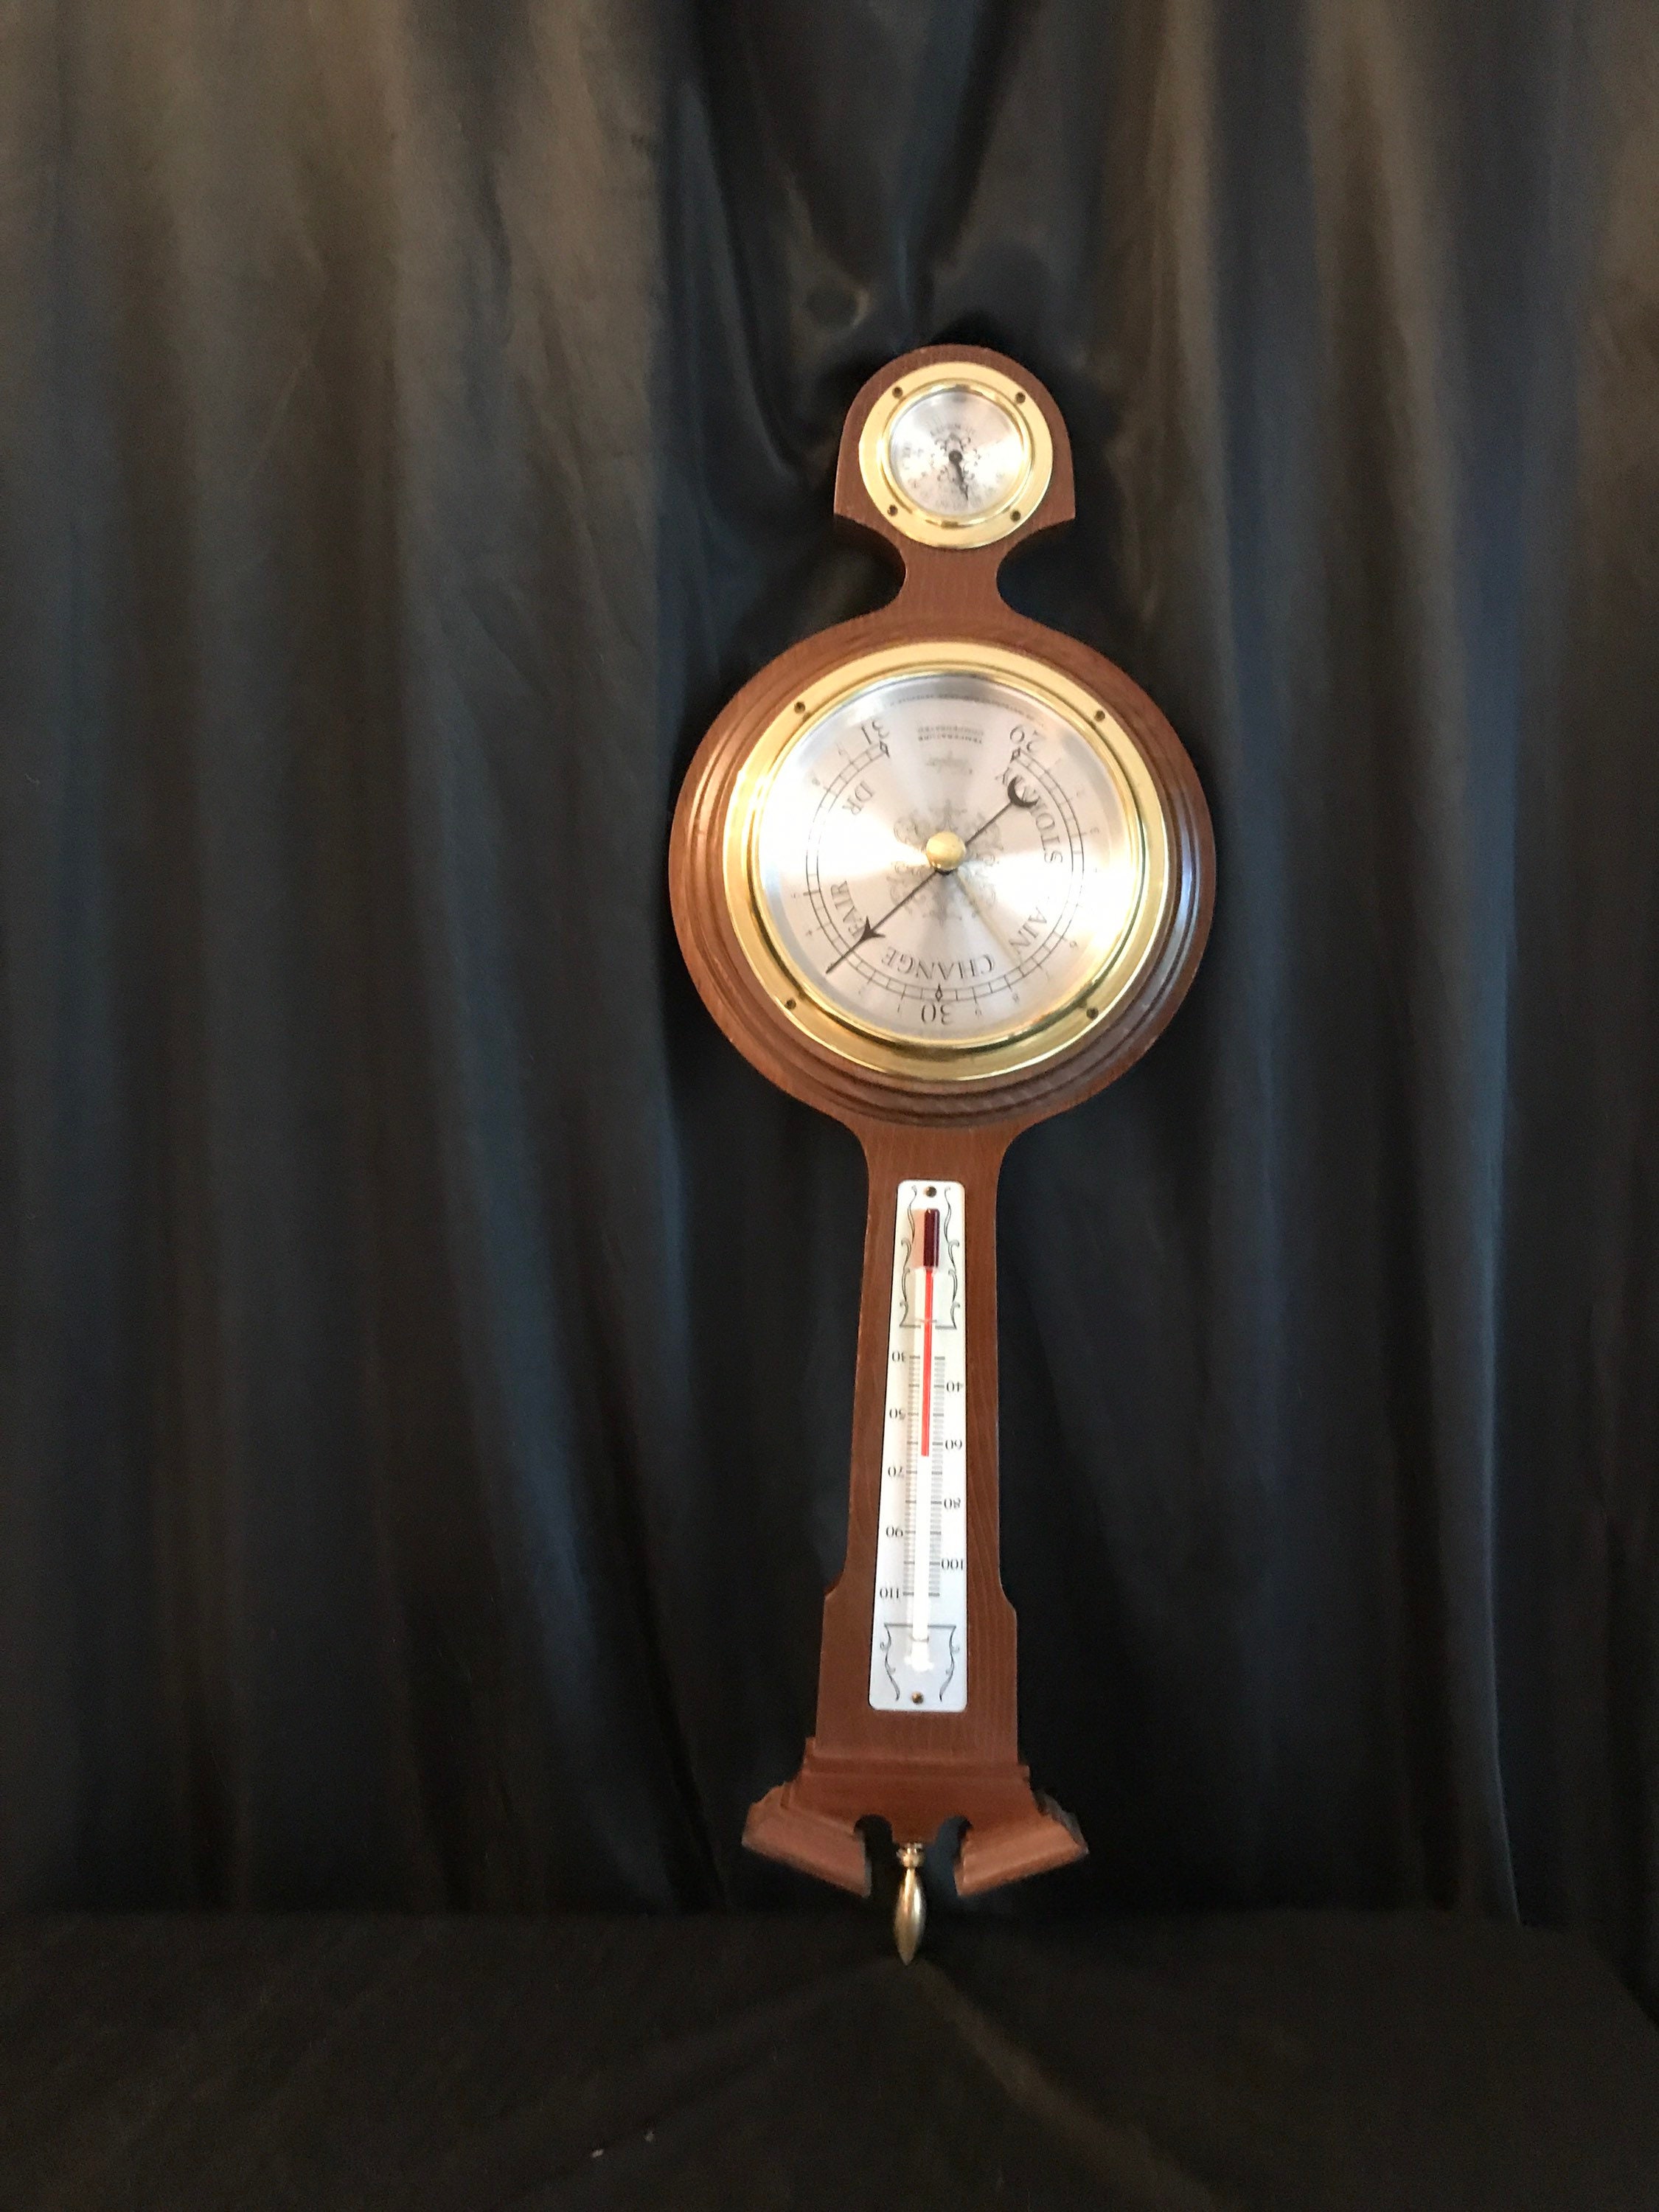 Vintage Airguide Barometer, 1956 Wall Hanging Banjo Barometer, Chicago,  Made in USA, Collectible Barometers, Fathers Day Gift, Antiques 